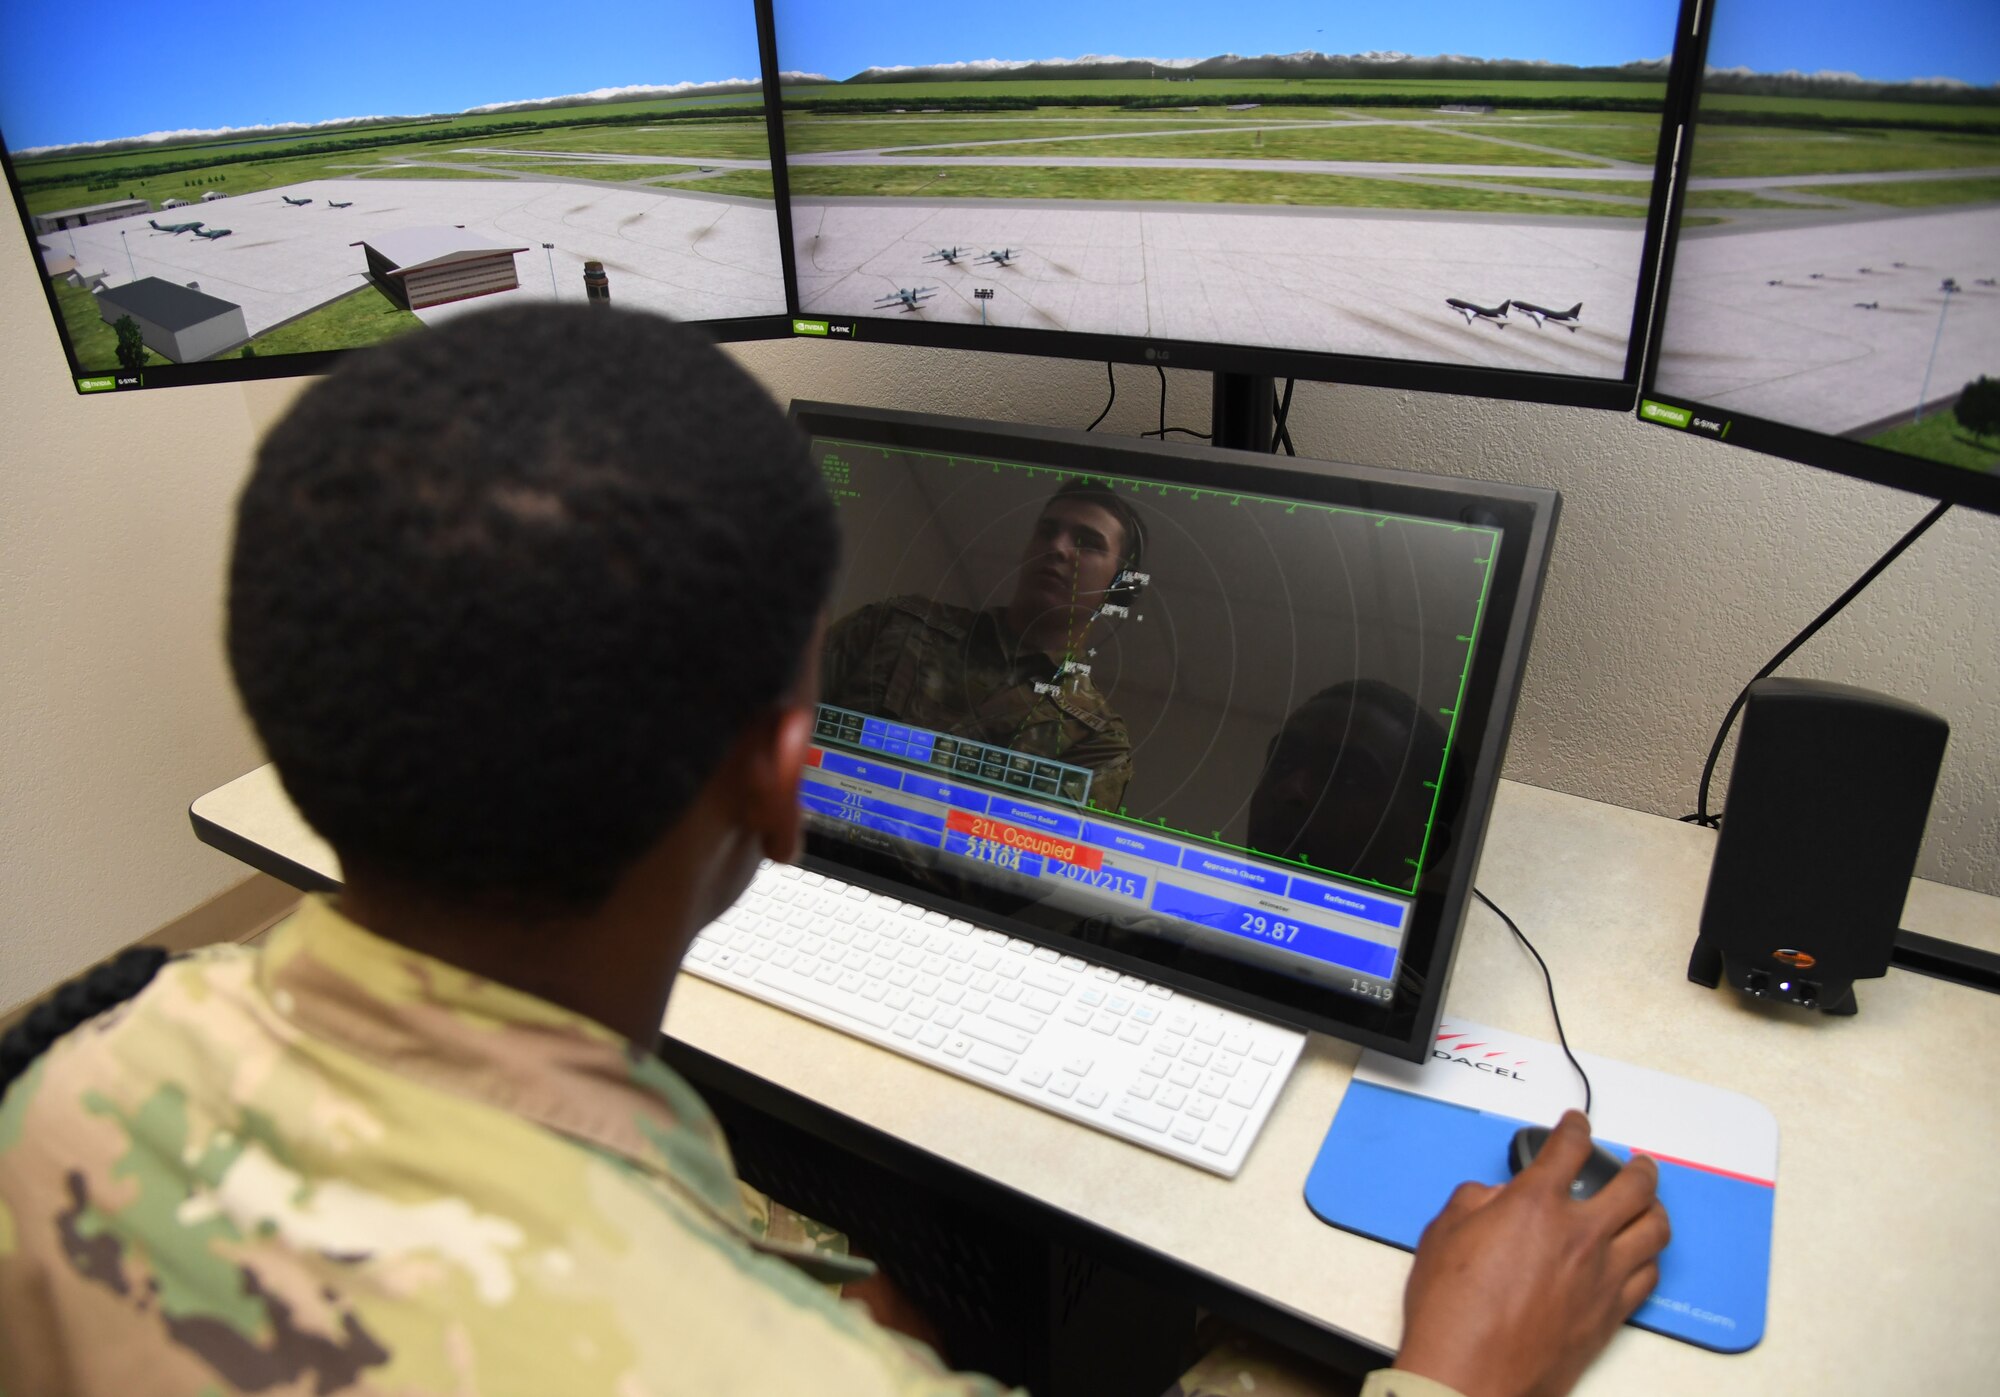 U.S. Air Force Airmen Jayden Ali and Luke Pietrykowski, 334th Training Squadron students, use a condensed air traffic control tower simulator for training inside Erwin Manor at Keesler Air Force Base, Mississippi, April 13, 2022. Four trainers were installed to allow students the opportunity to increase tower control contact hours and to provide students additional study and familiarization time outside the classroom. (U.S. Air Force photo by Kemberly Groue)